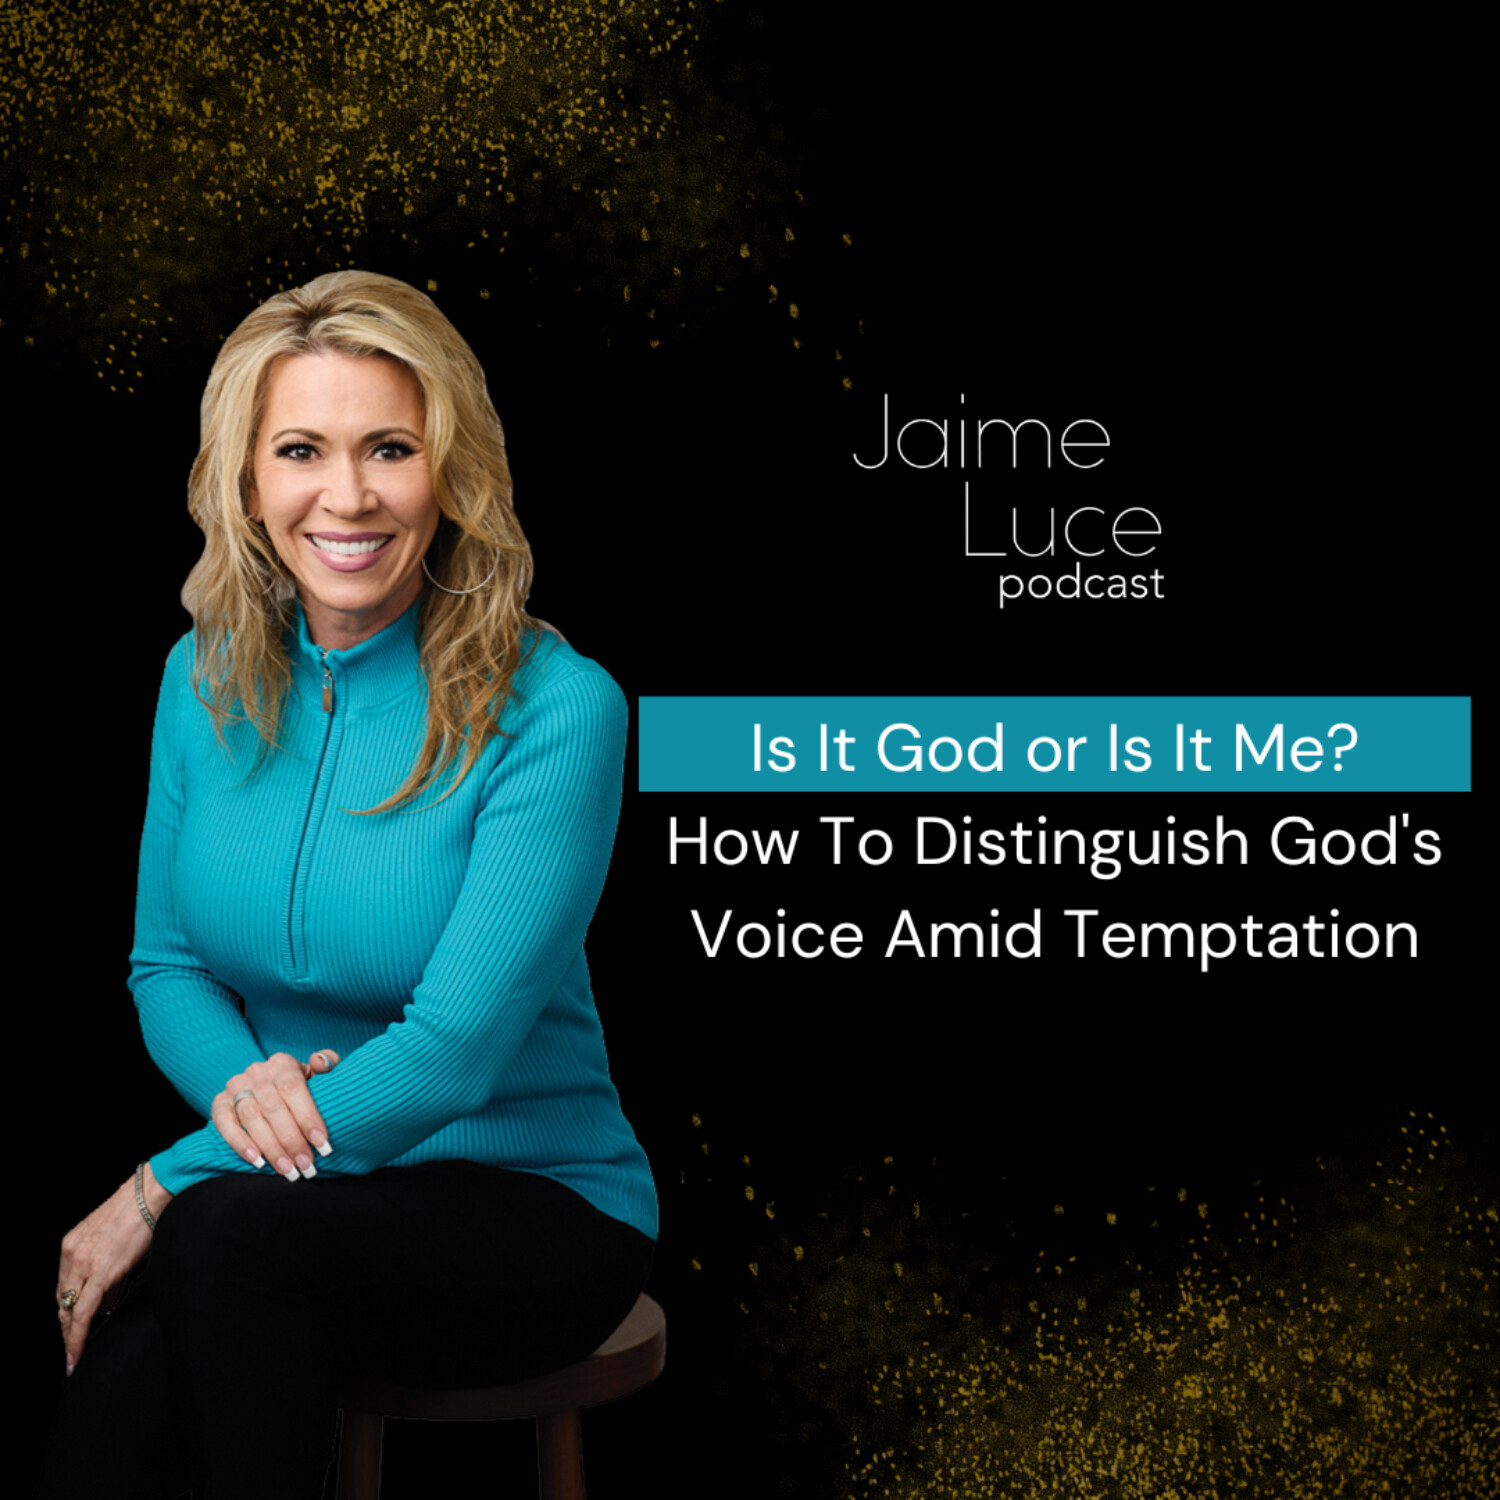 Is It God or Is It Me? How To Distinguish God's Voice Amid Temptation